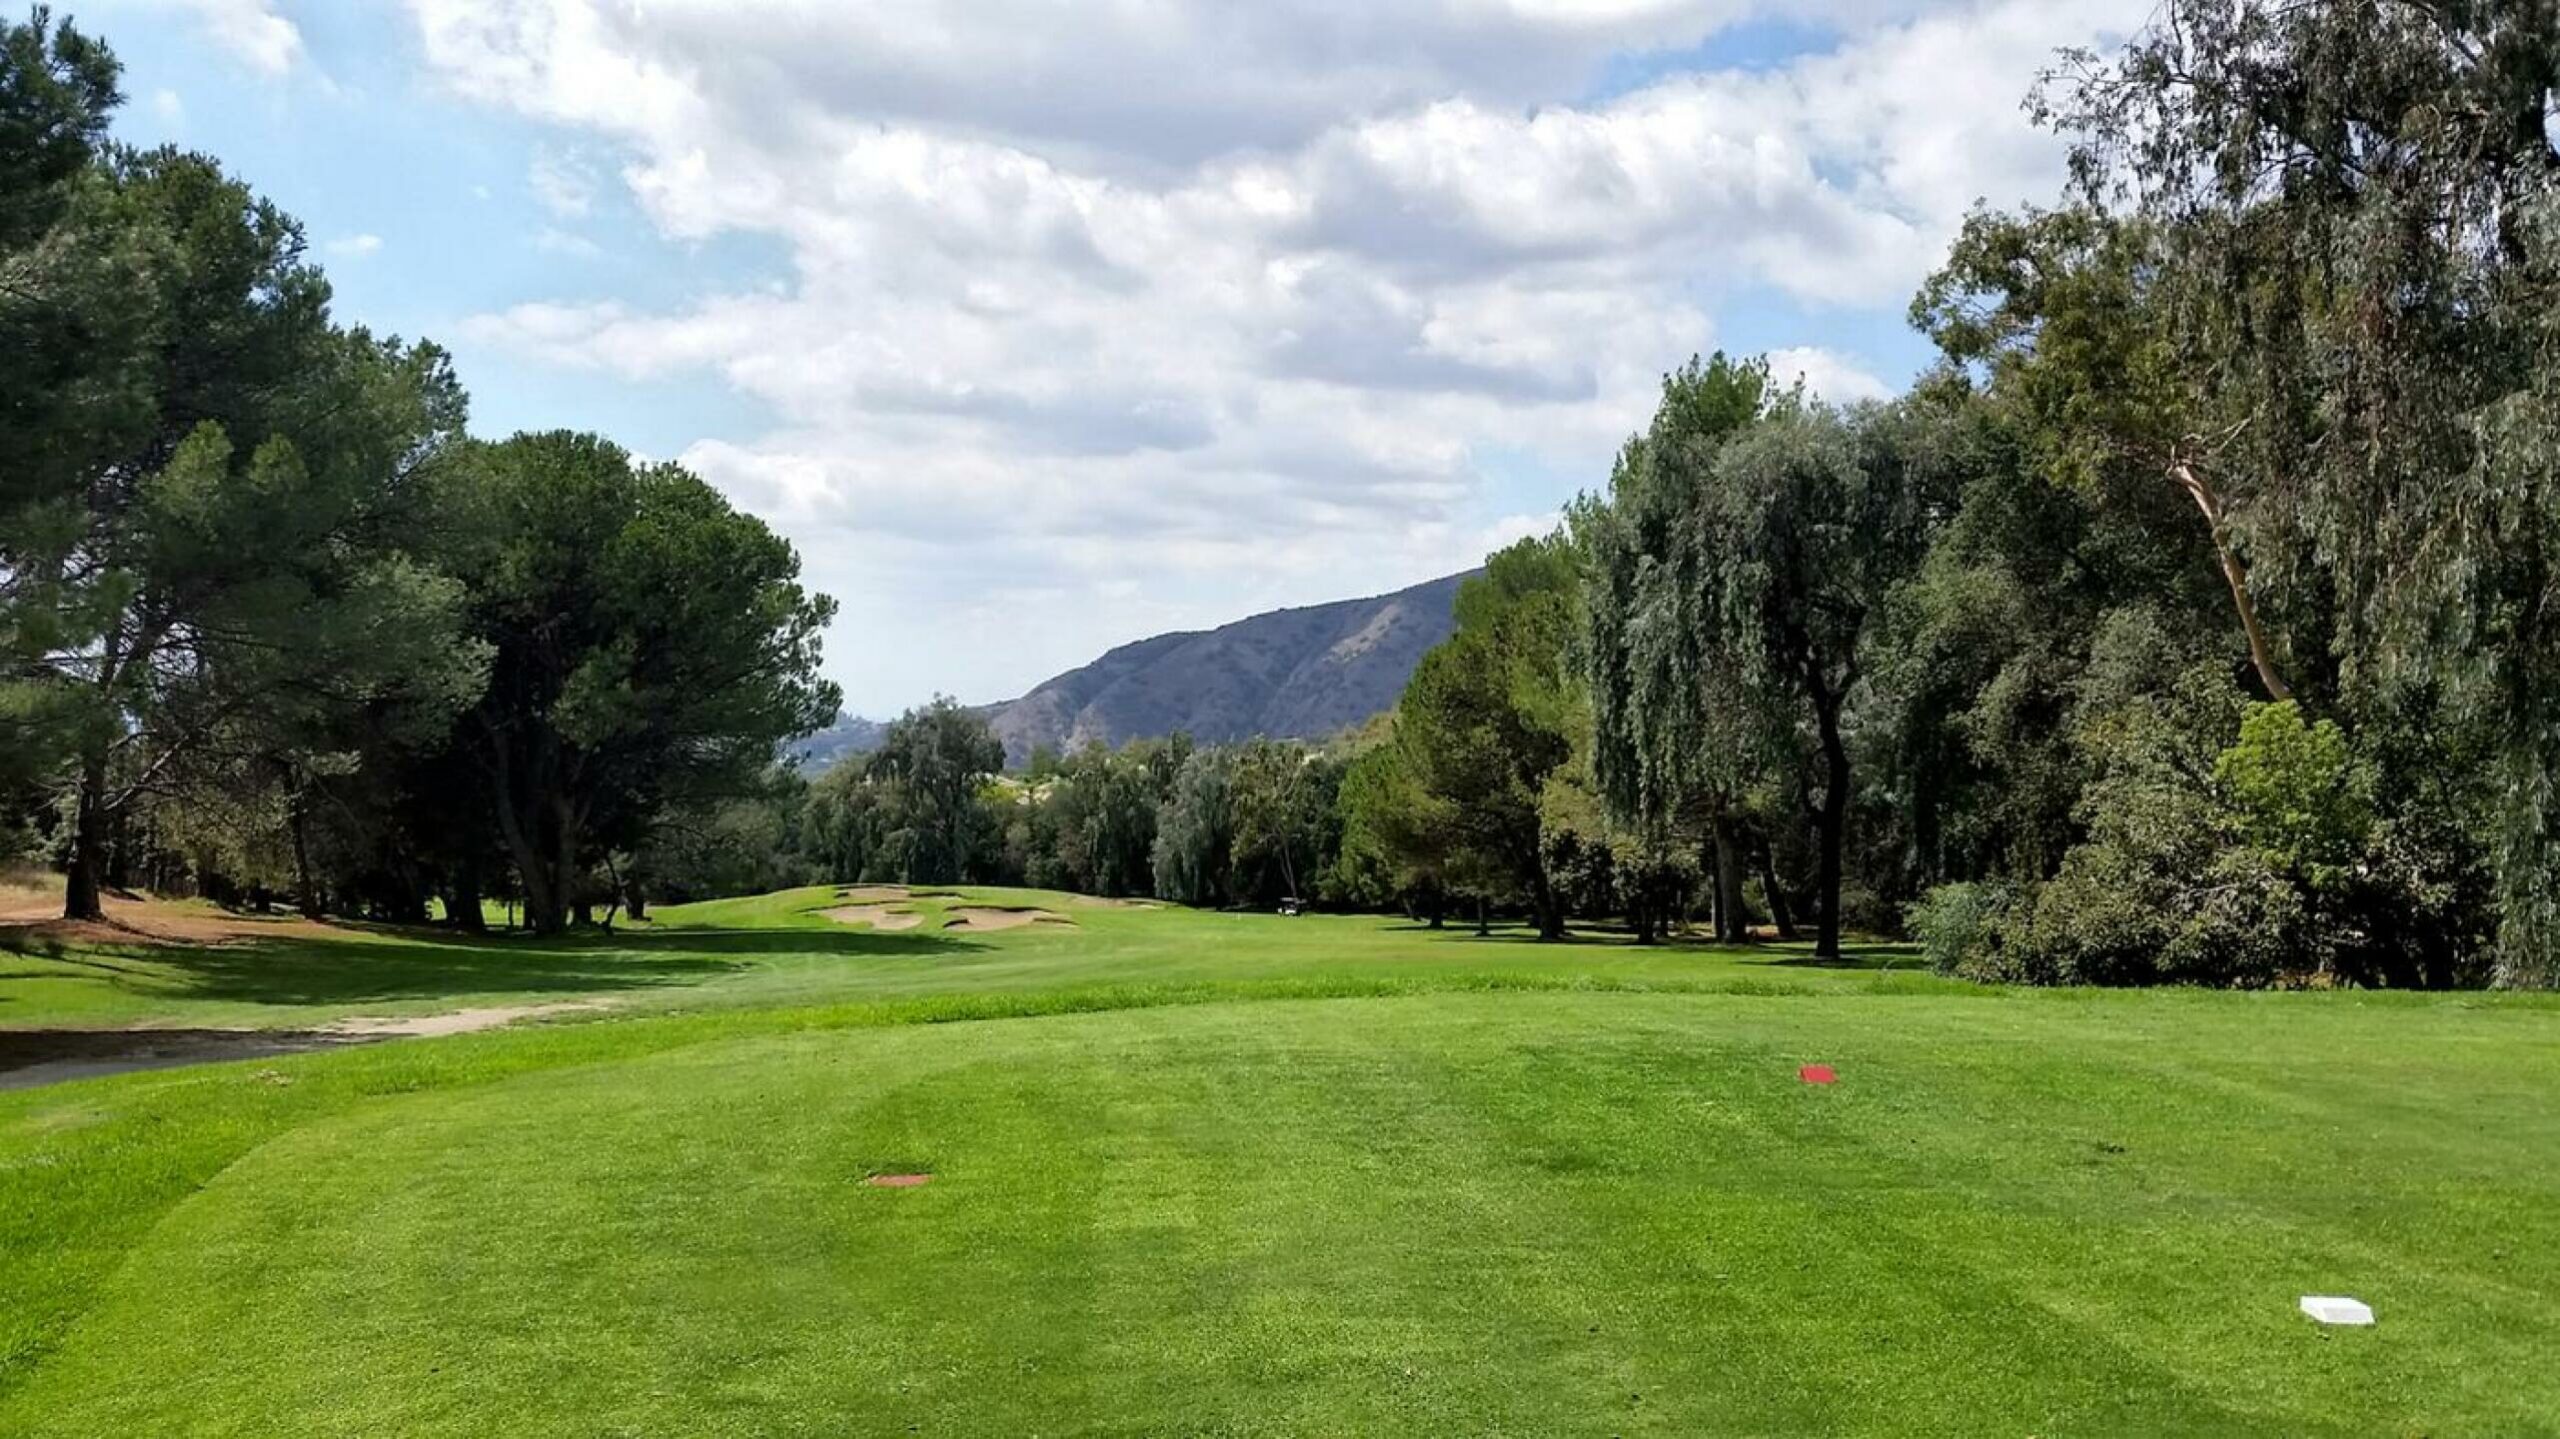 Marshall Canyon Golf Course: A Verdant Oasis in La Verne, CA